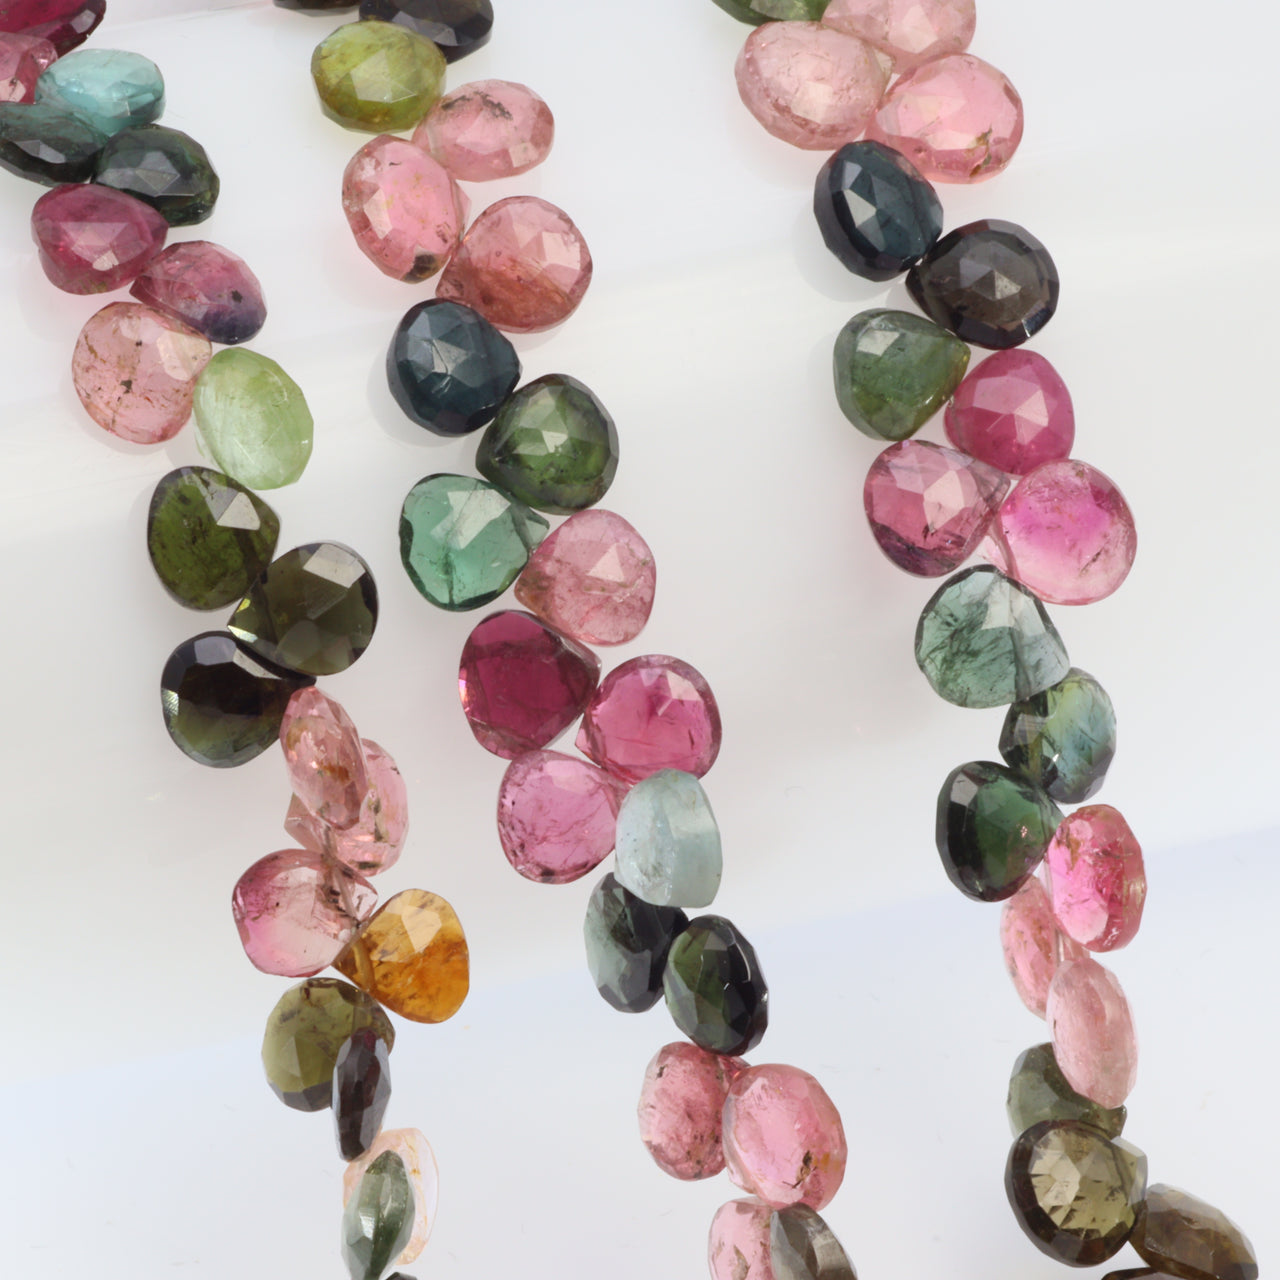 Watermelon Tourmaline 6.5mm Faceted Heart Shaped Briolettes